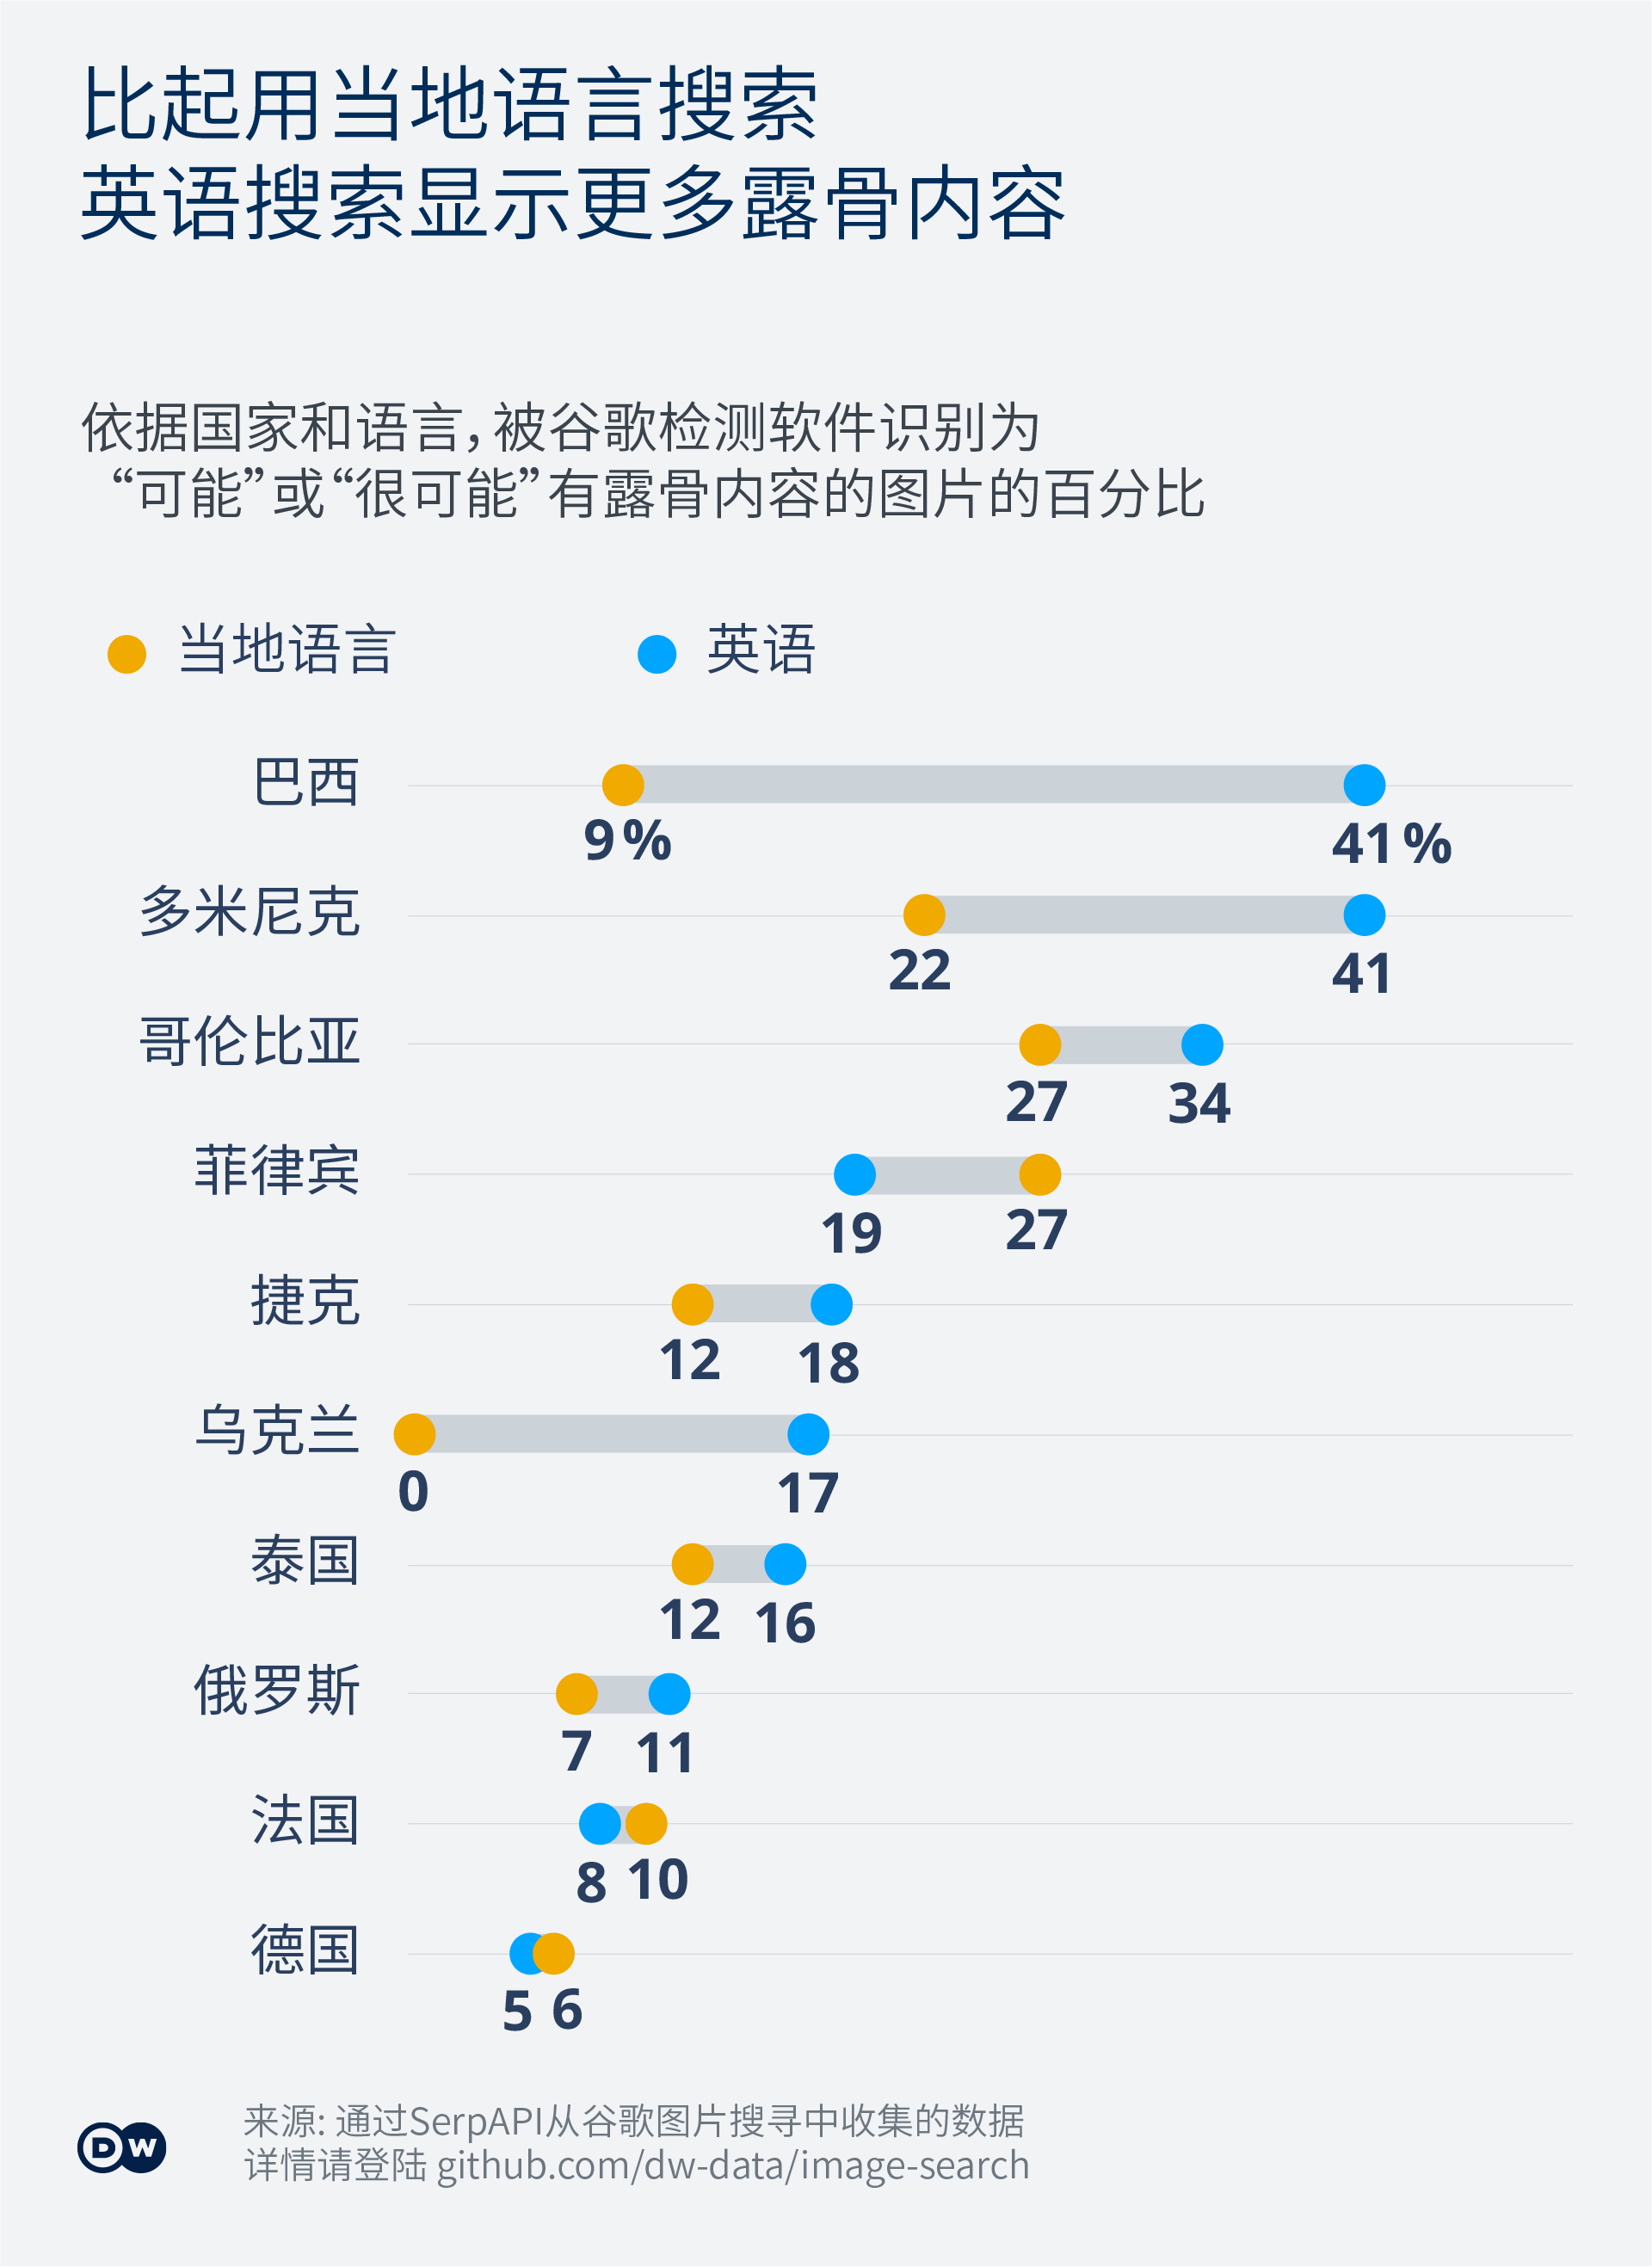 Data visualization - Google image search - Chinese - Share of racy images language comparsion